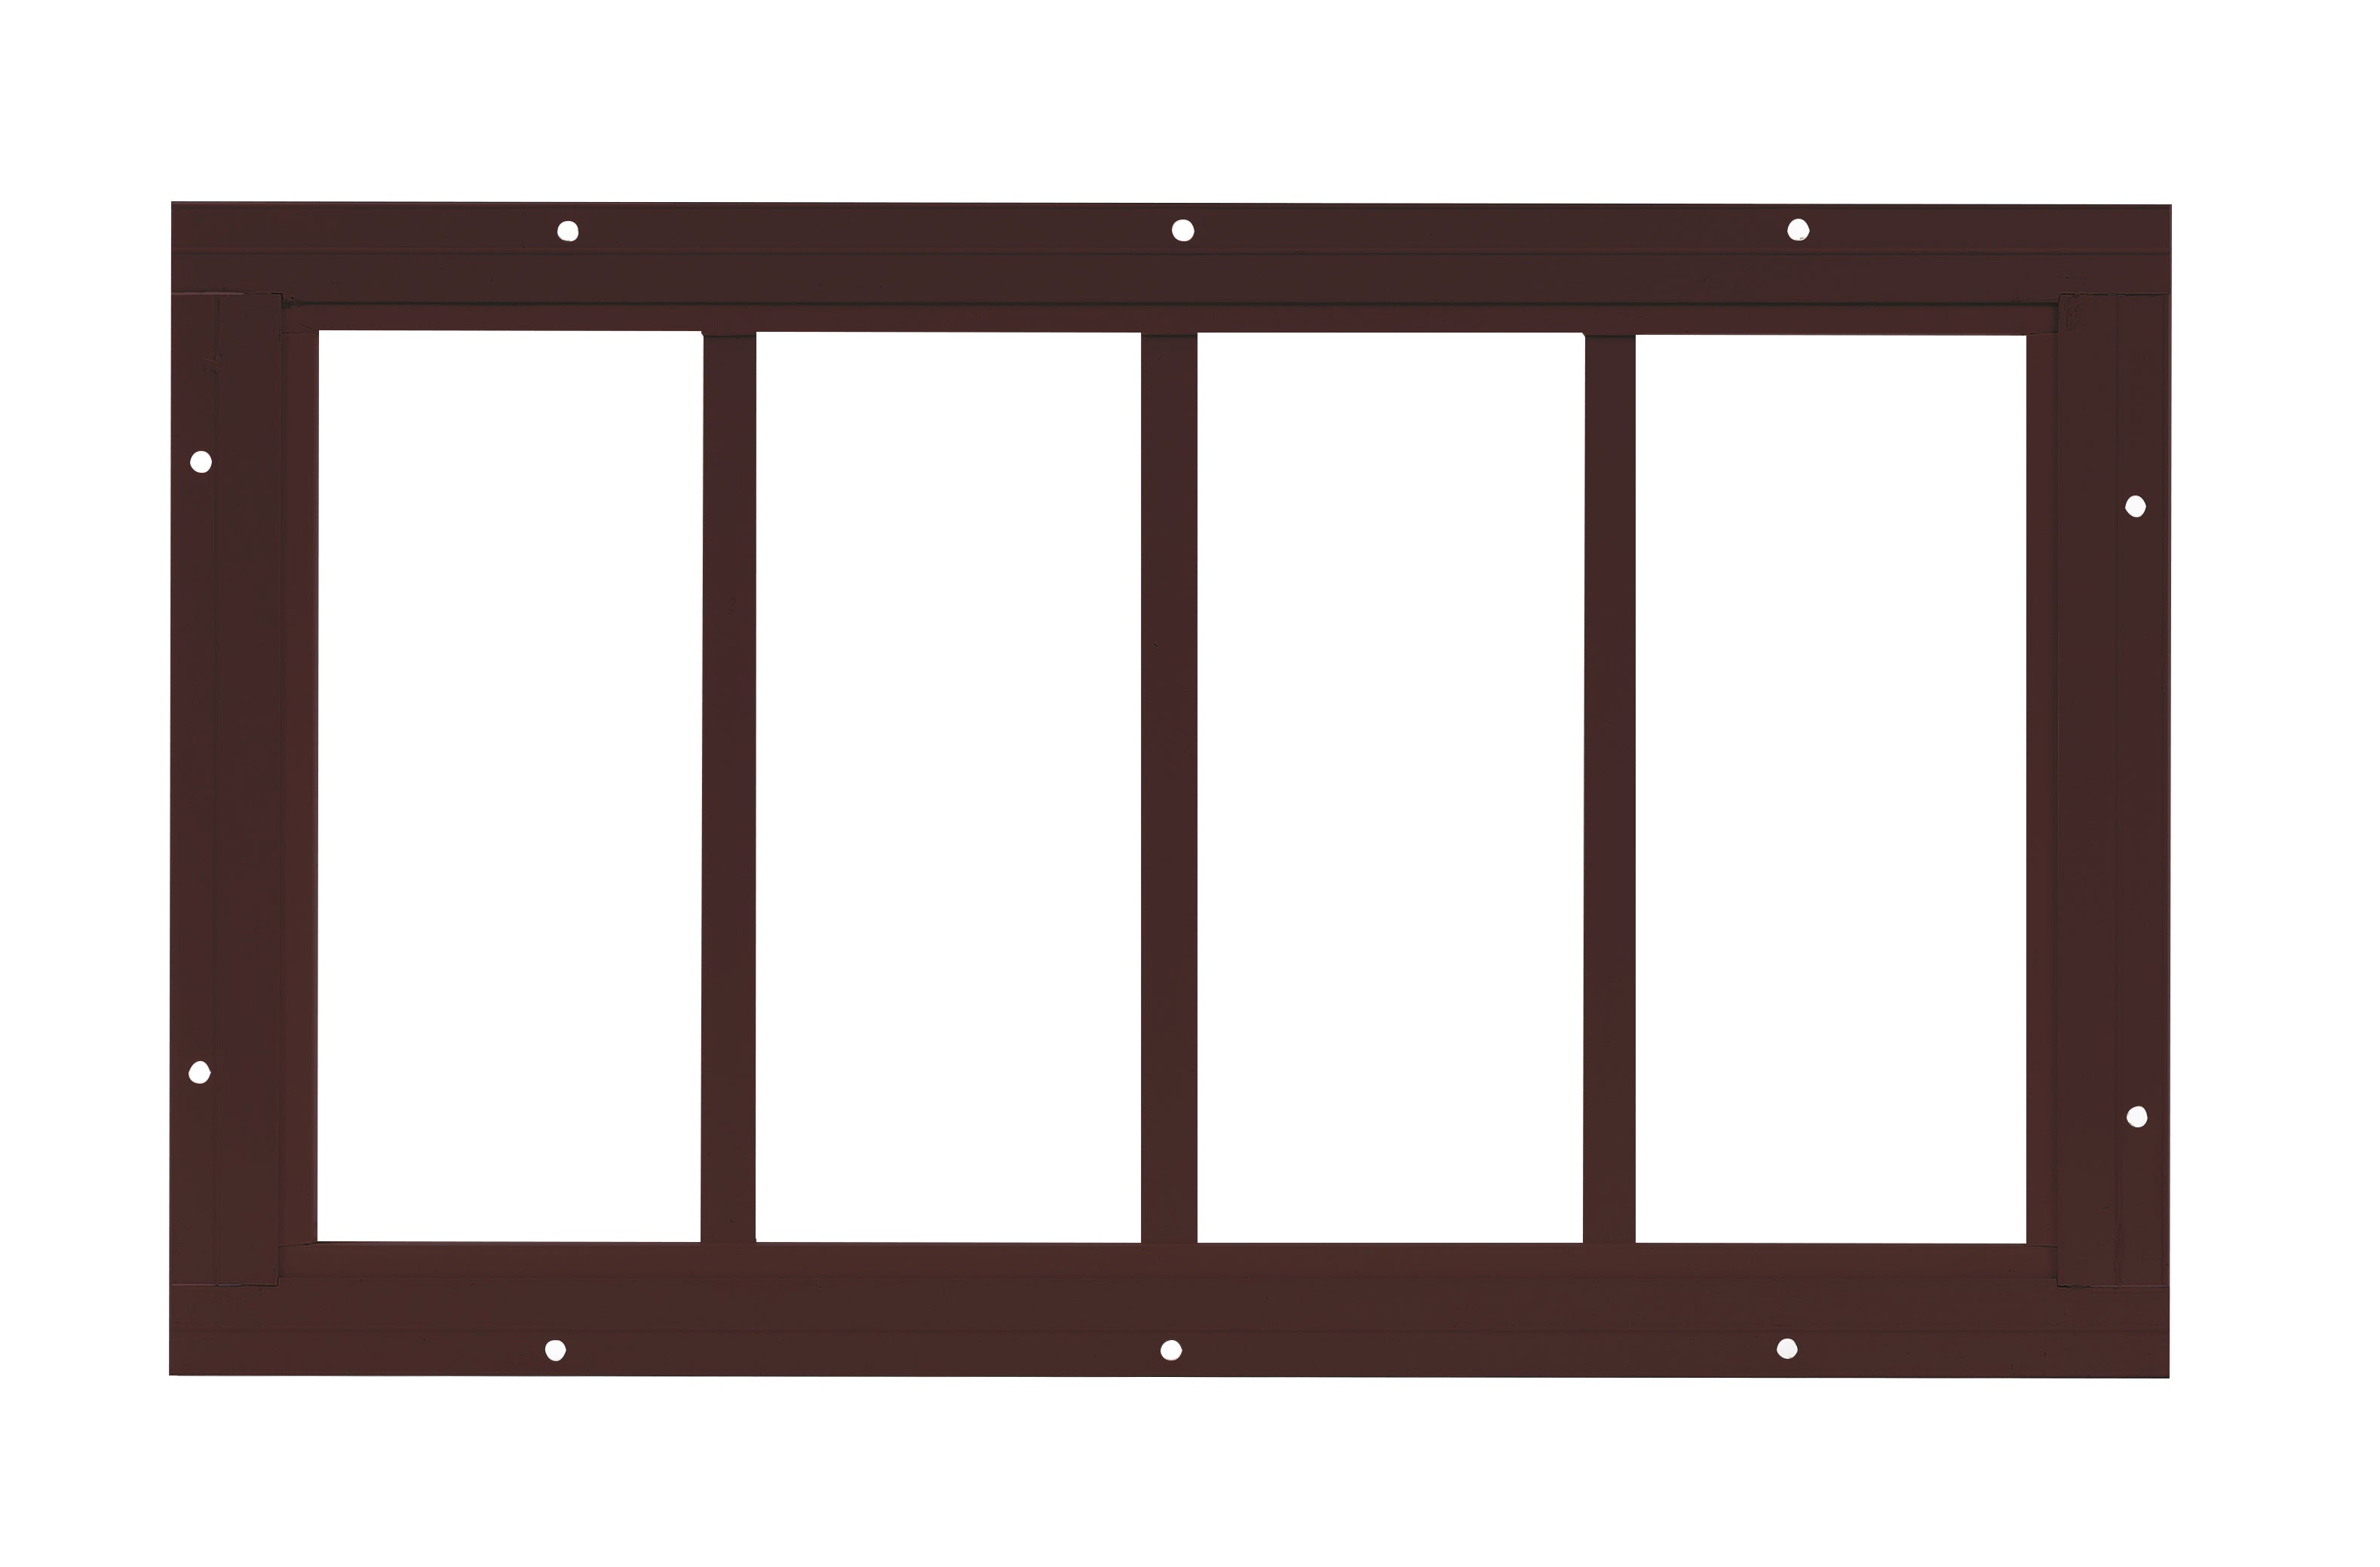 10.185" X 18" Transom Flush Mount PVC Brown Window with grids for Sheds, Playhouses, and MORE 